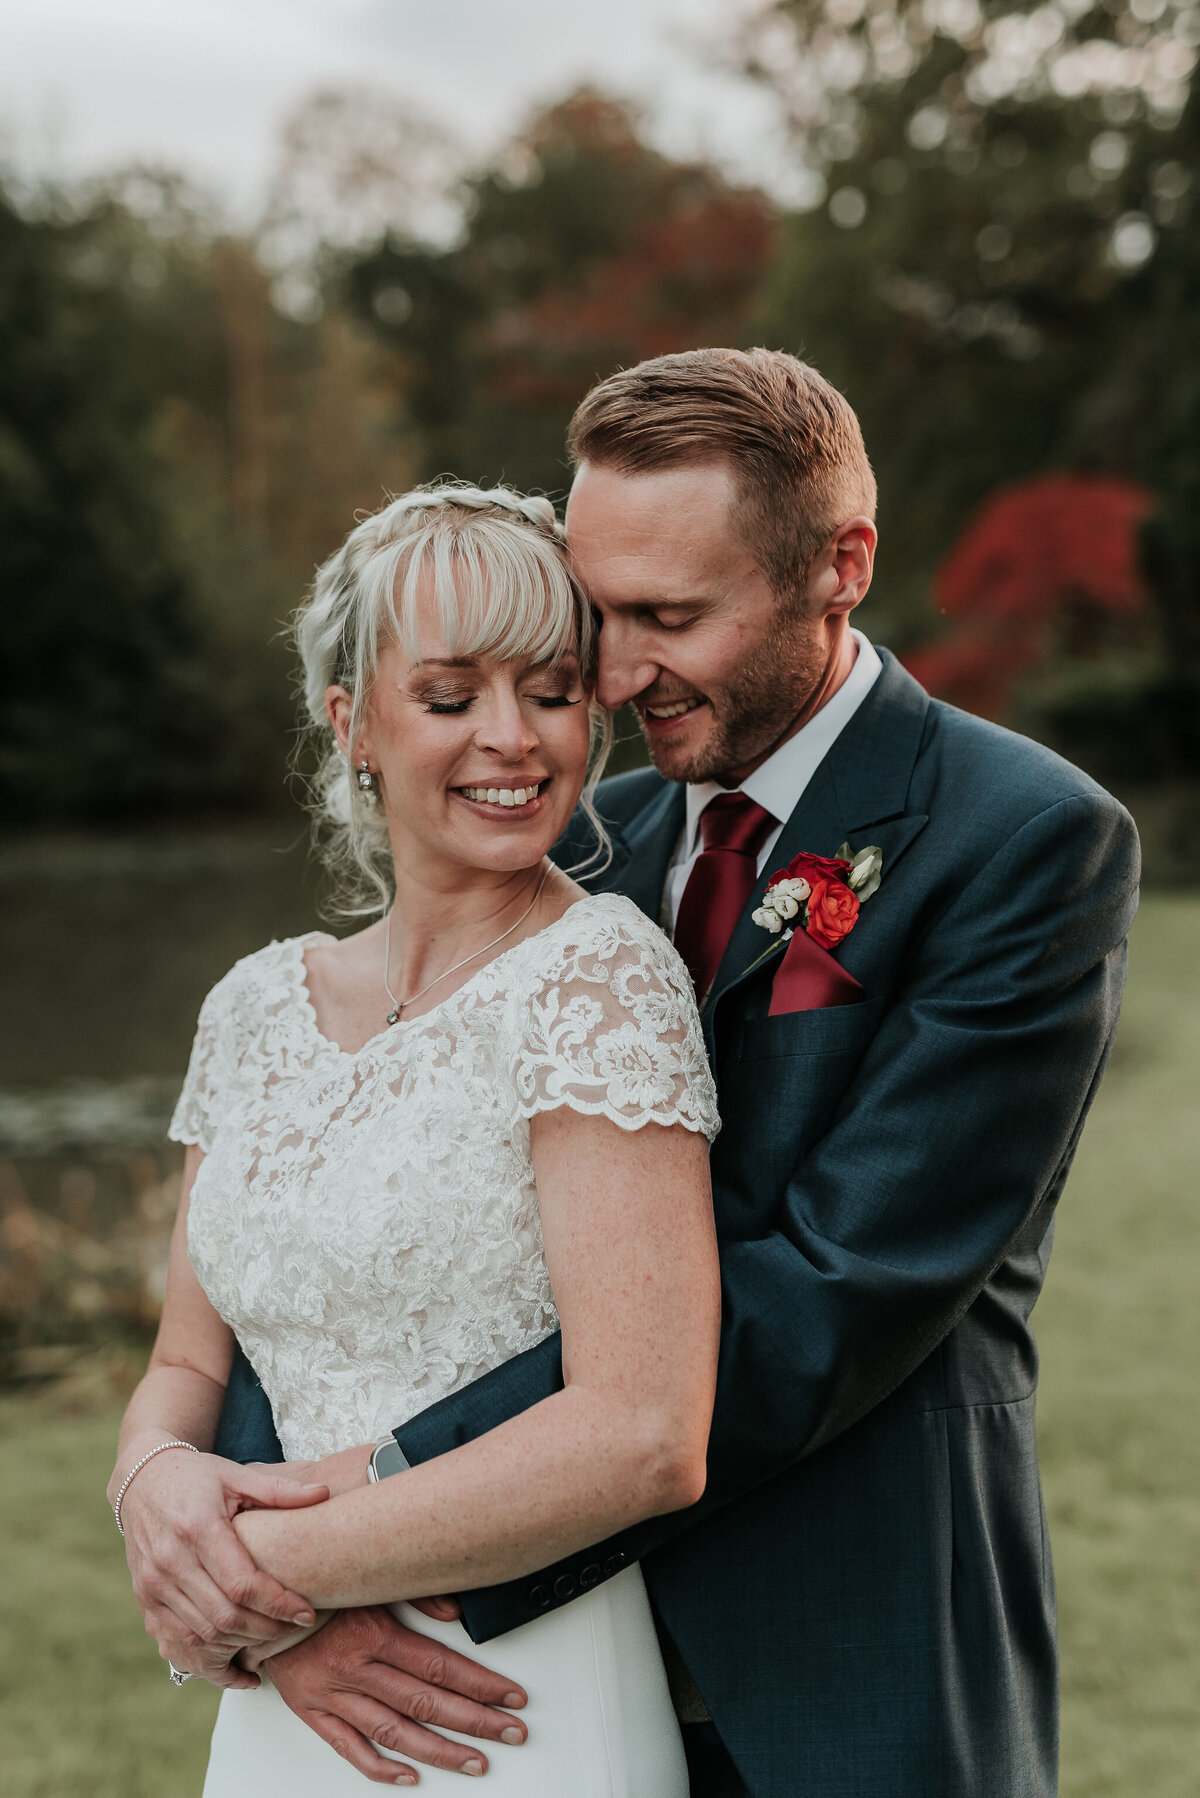 Groom embraces his Bride gently at their joyful autumn wedding at The Ravenswood